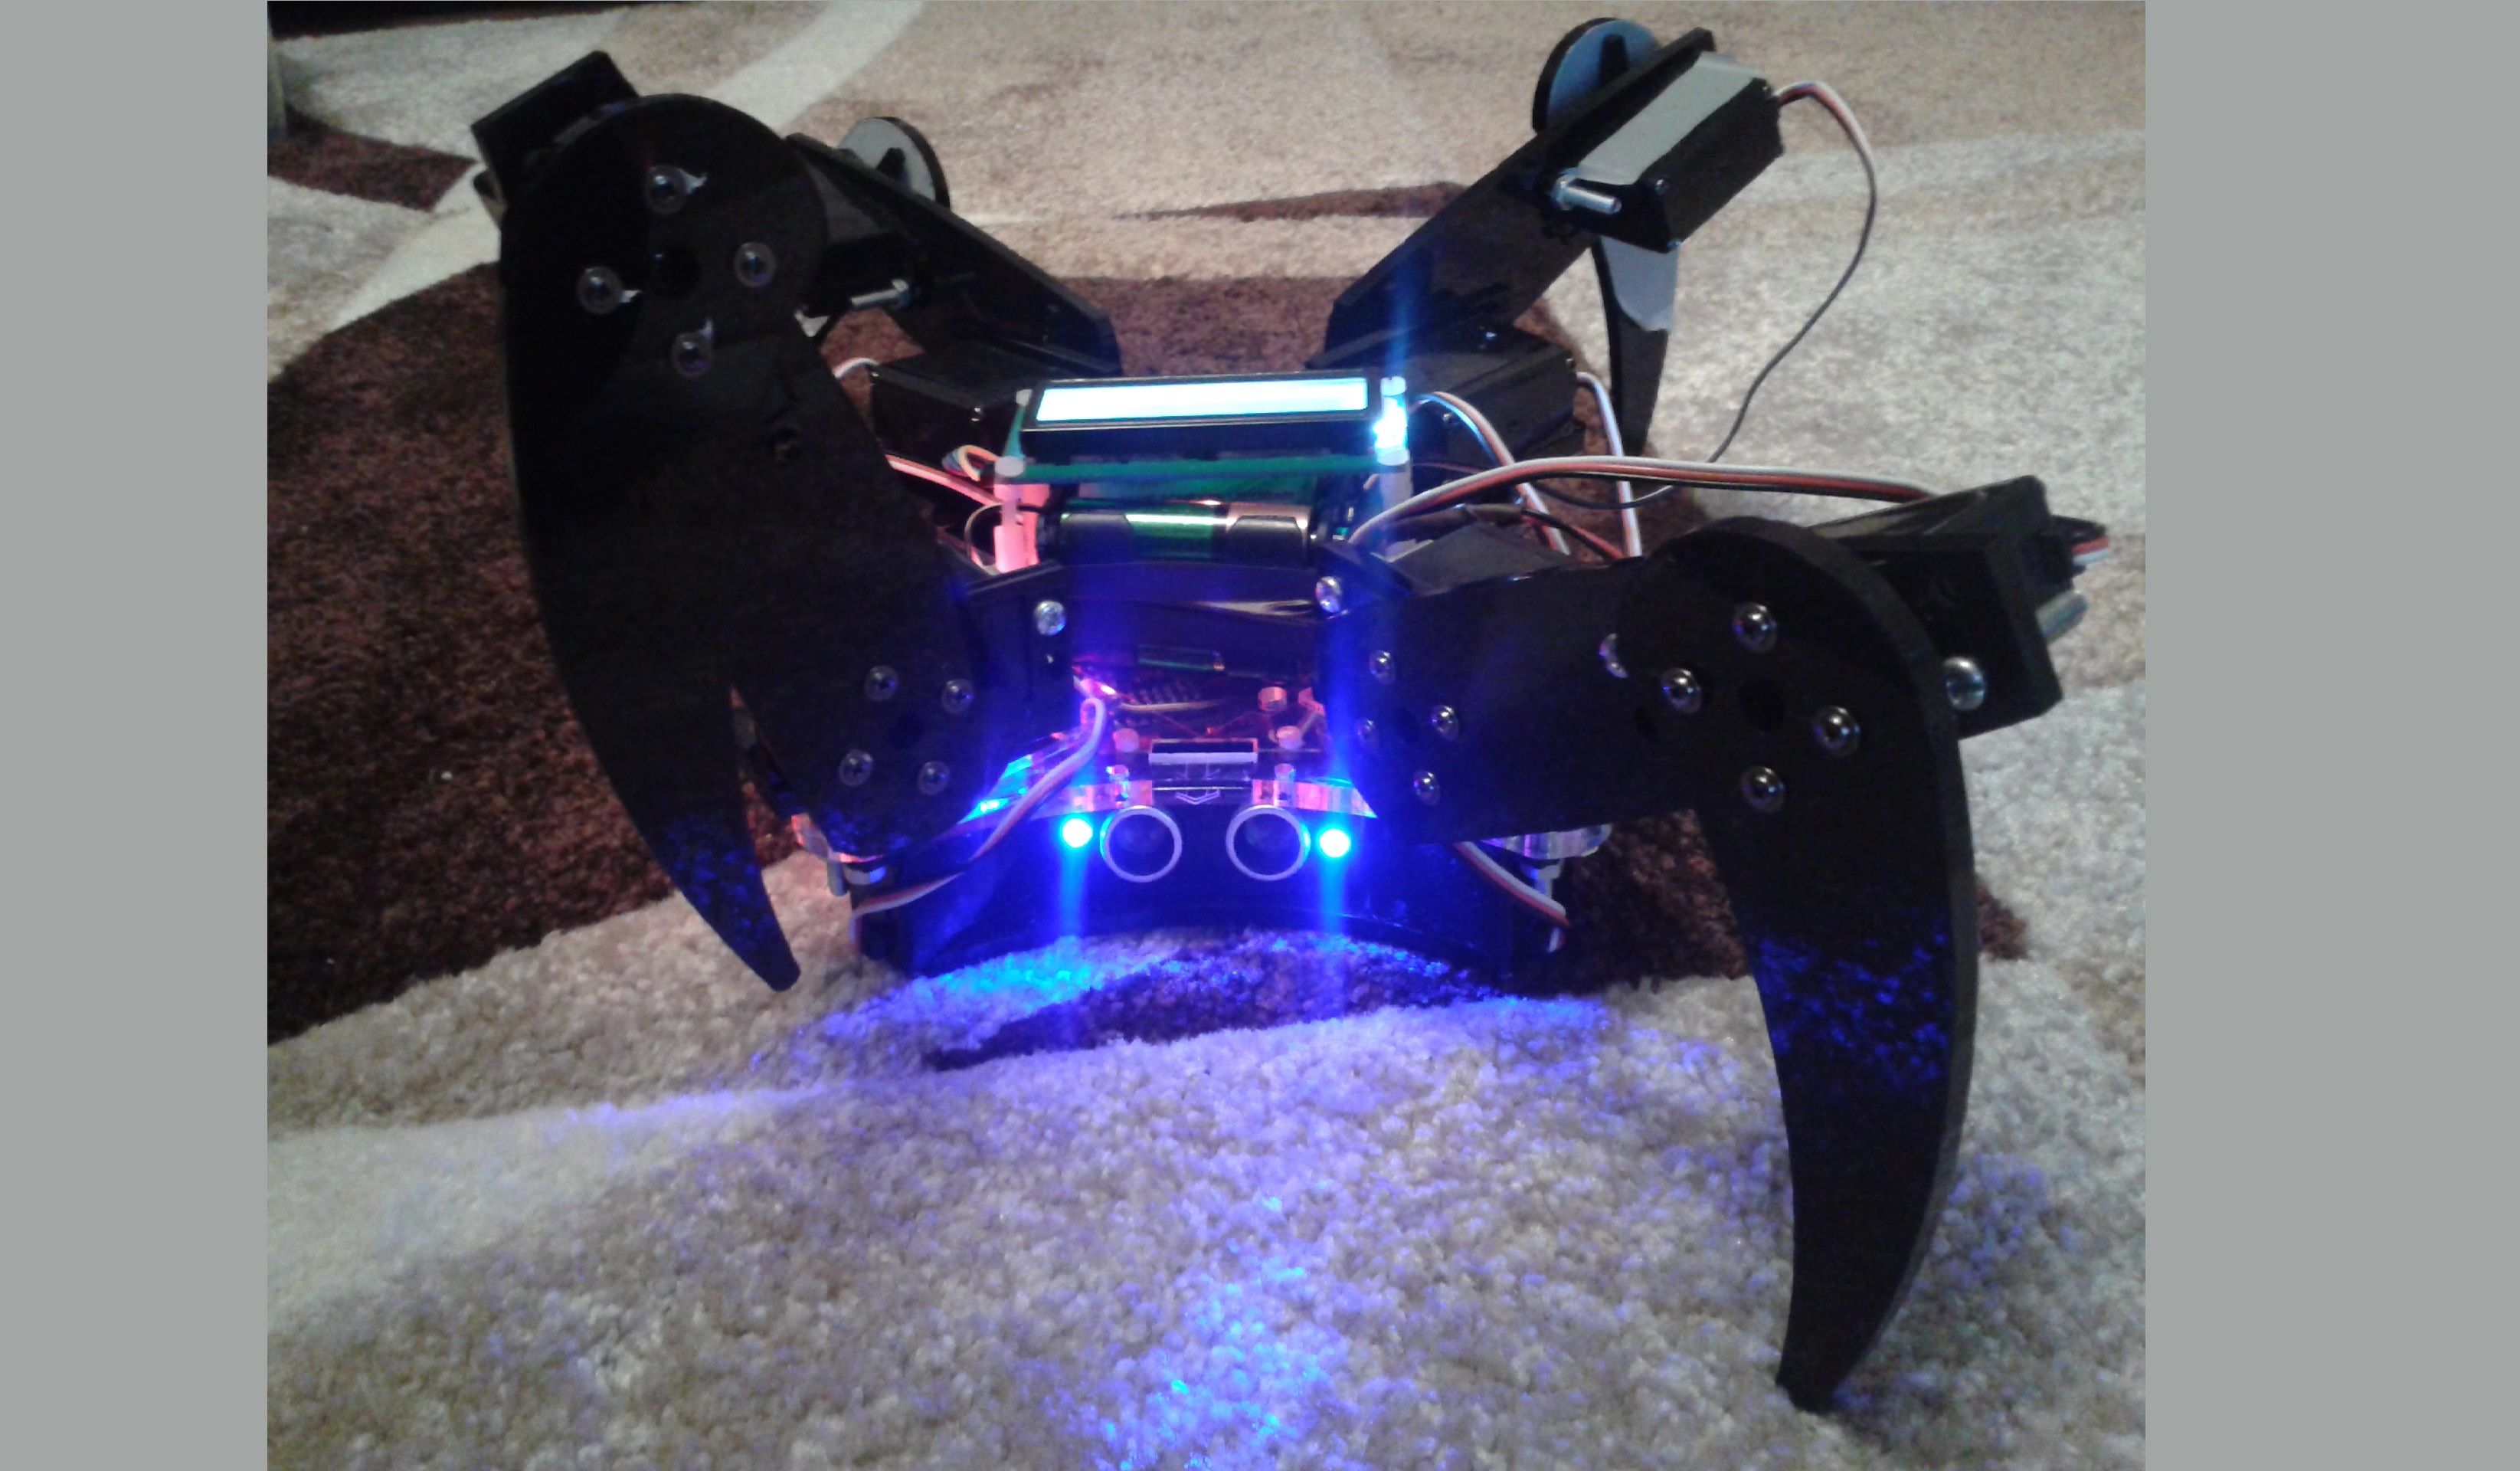 Robot on the floor with lights and LCD turned on